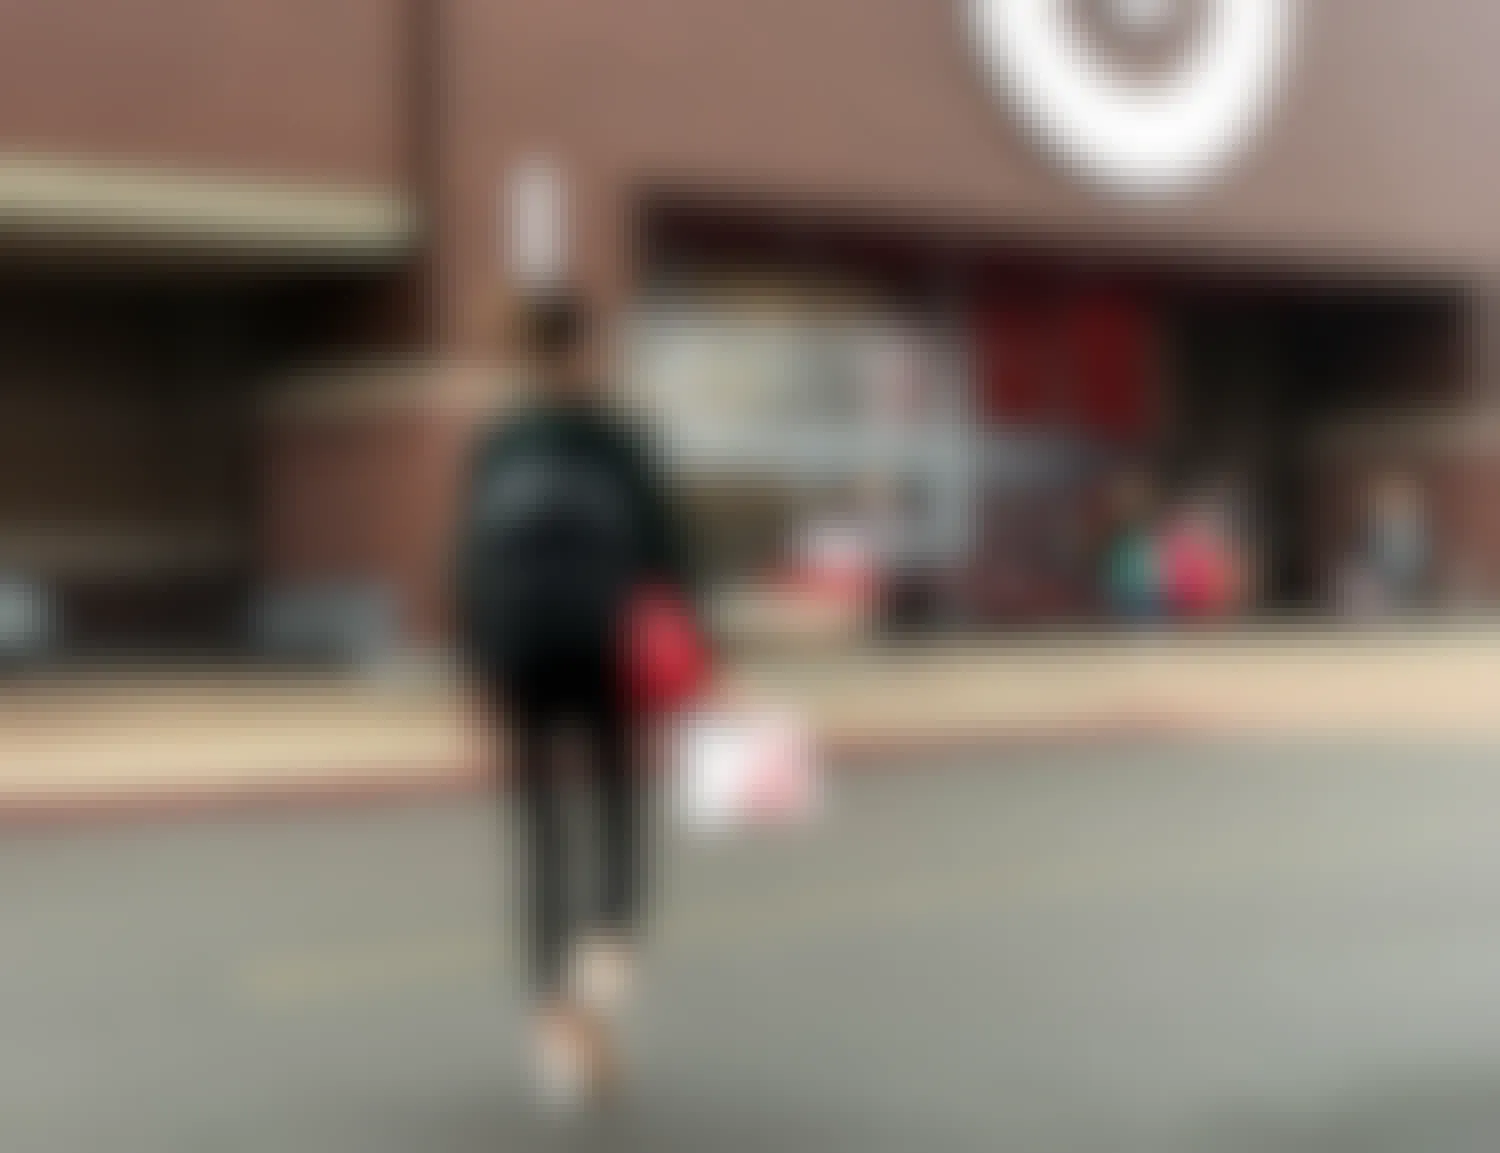 A person carrying a target bag walking toward the Target entrance.